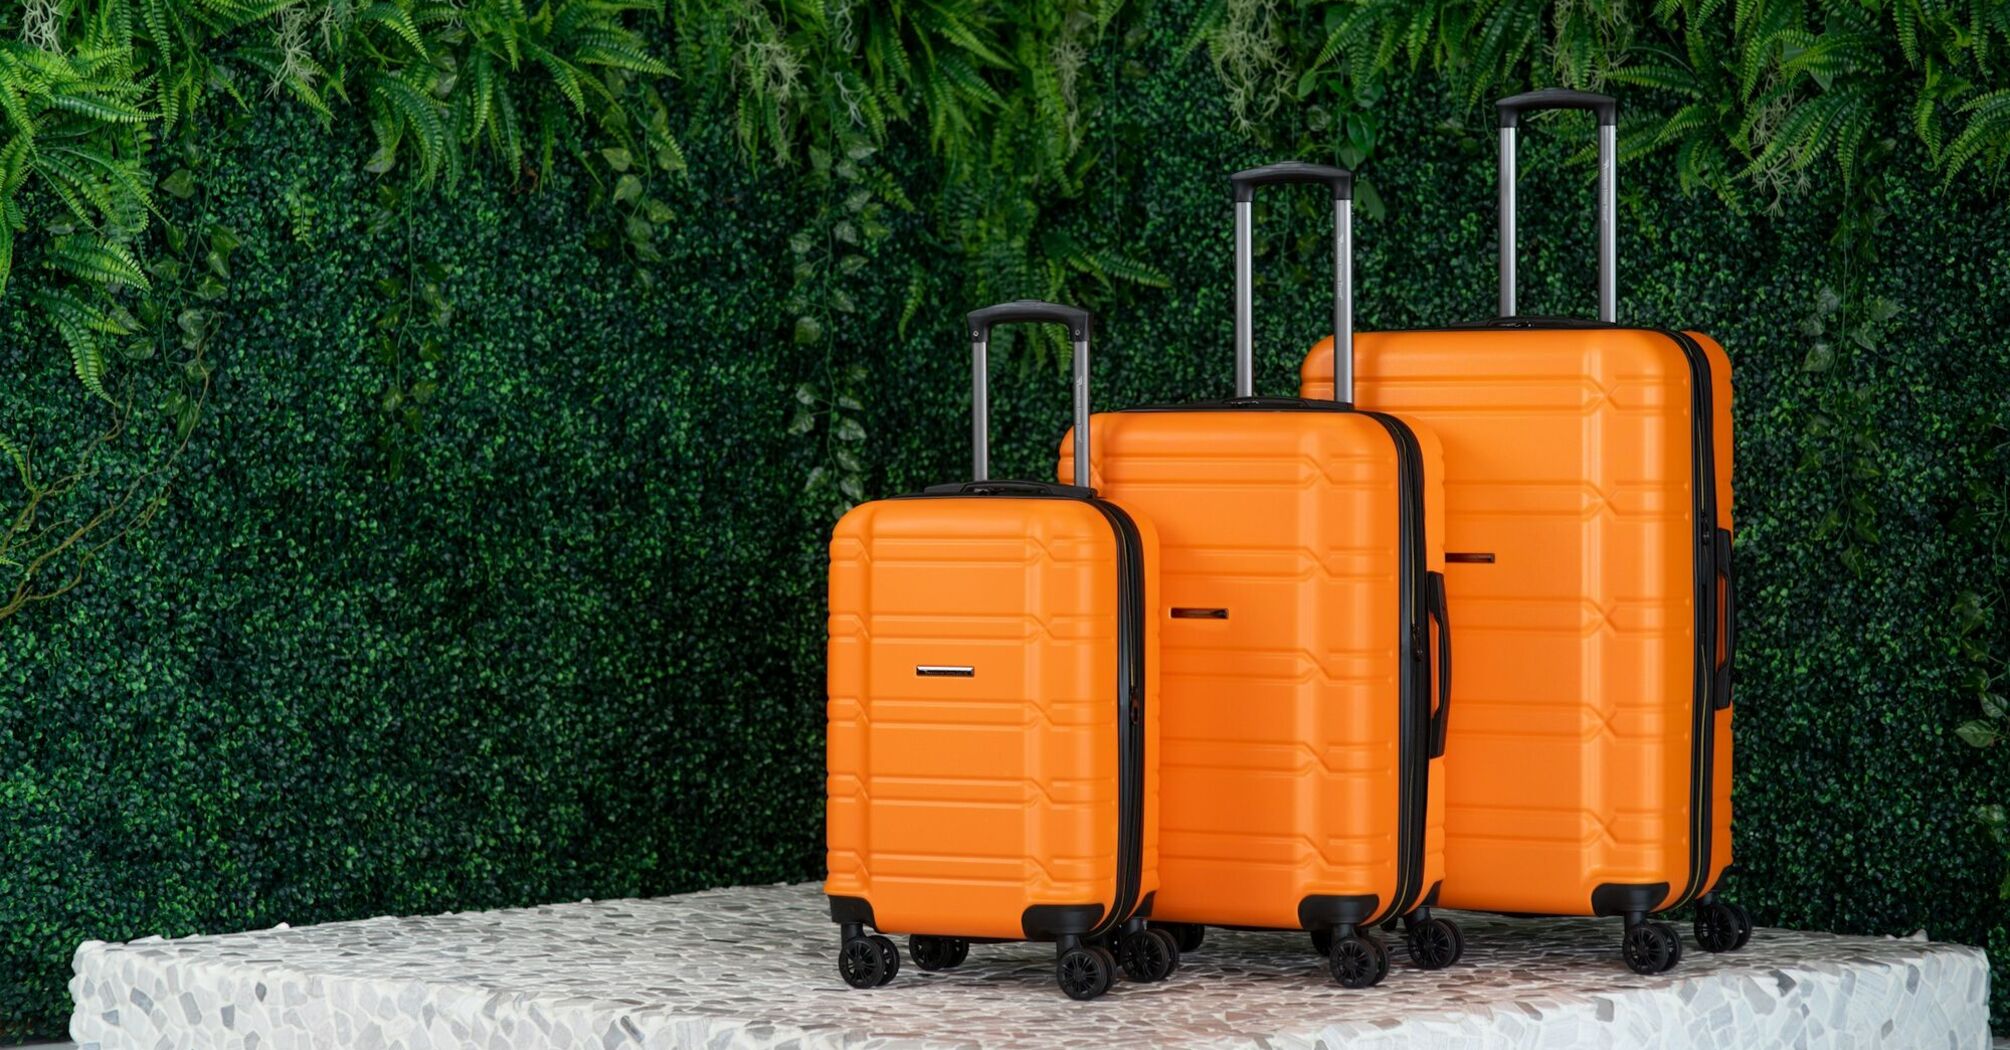 Three bright orange suitcases of varying sizes standing against a lush green plant-covered wall 